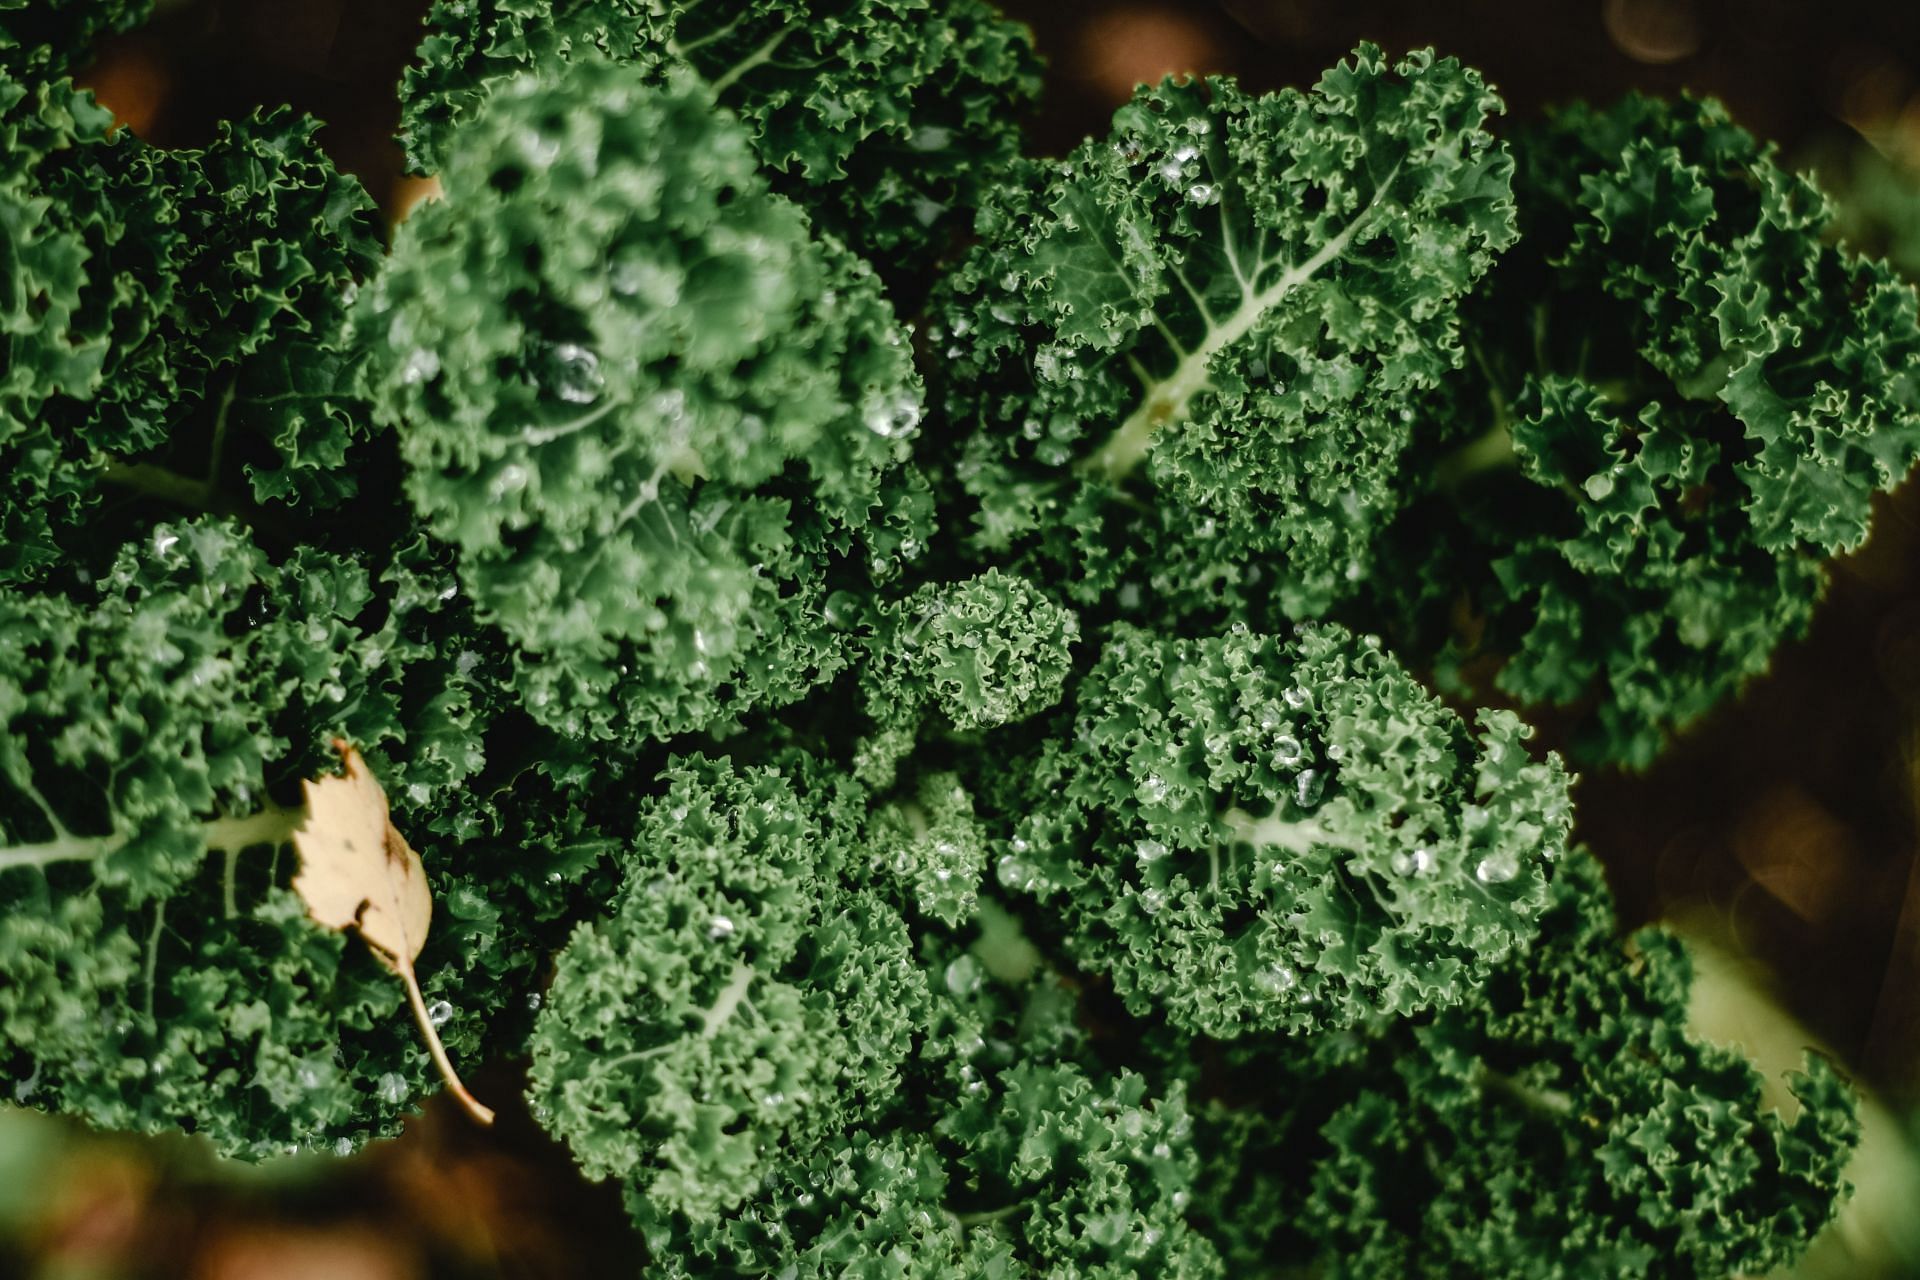 What are the health benefits of Kale? (Image via Pexels)